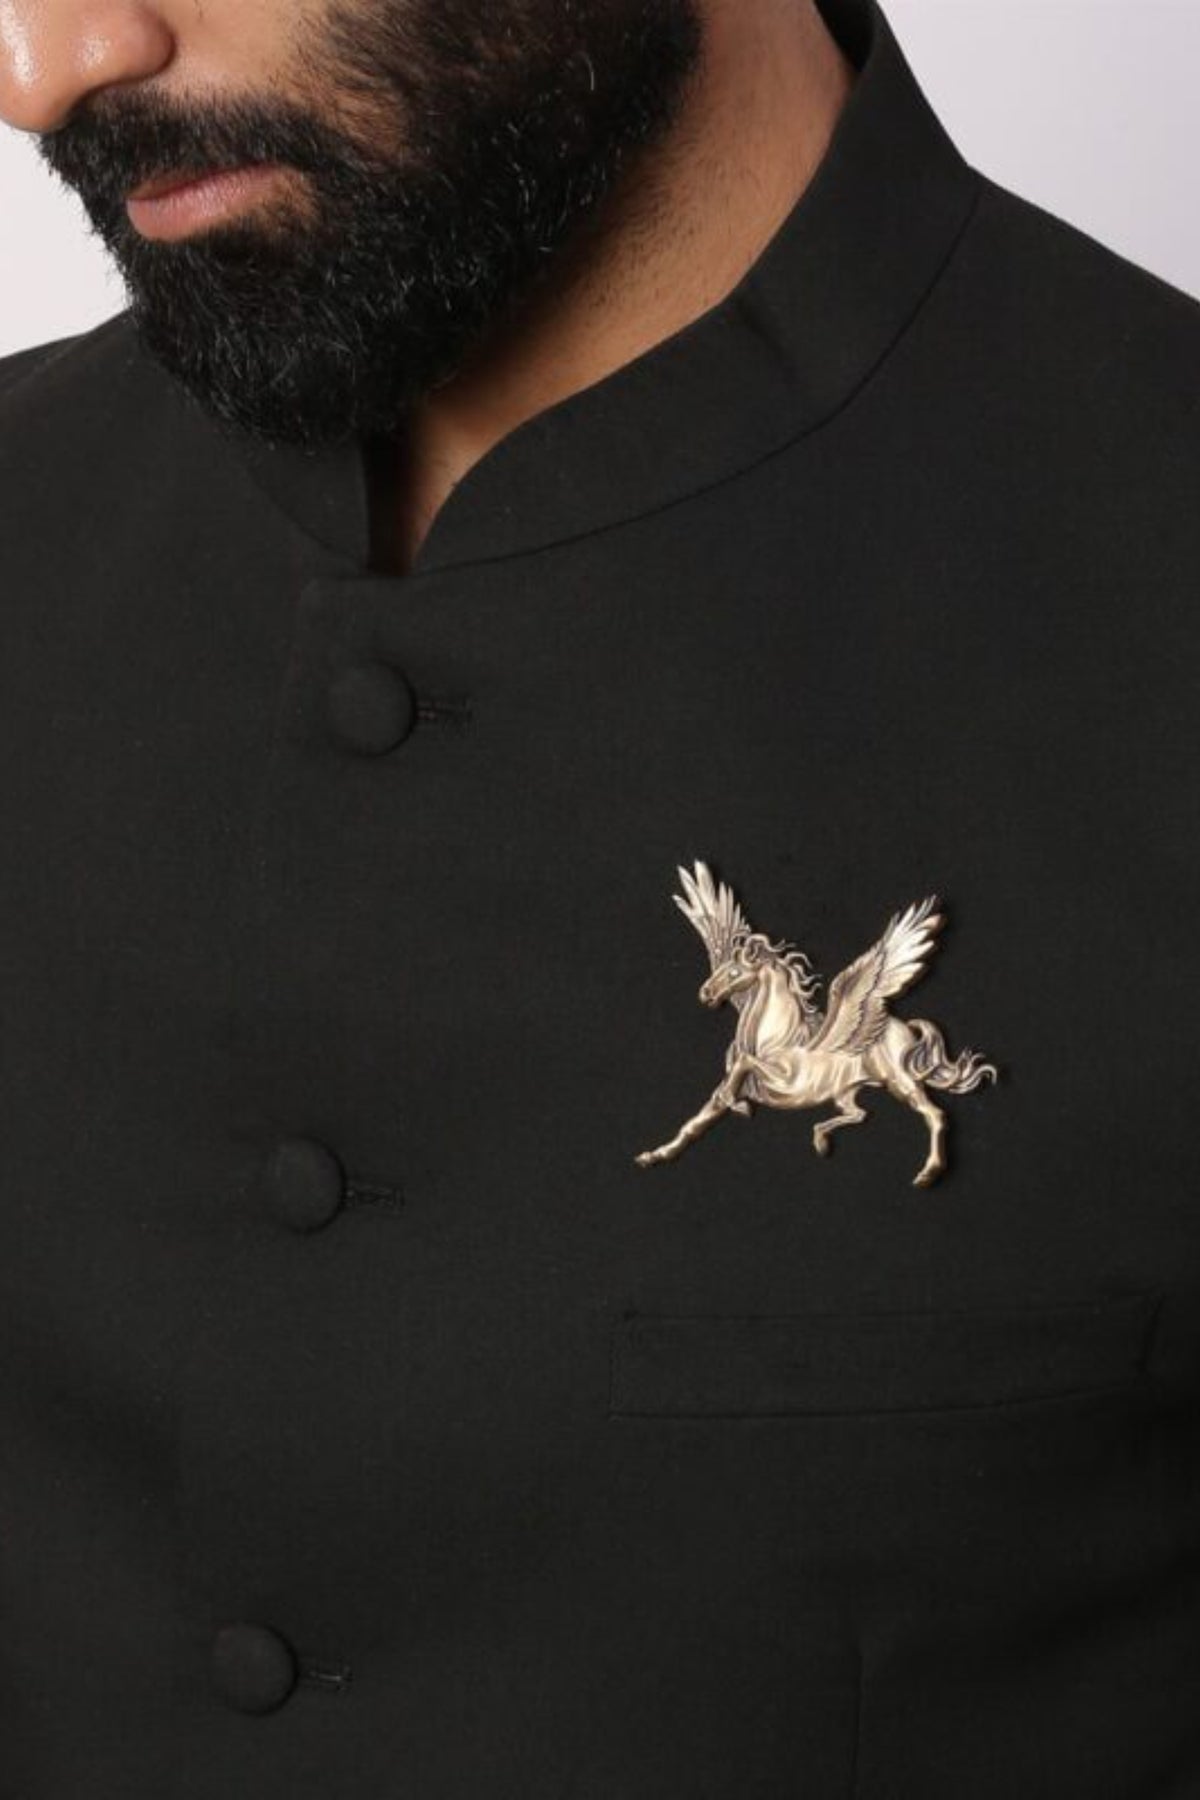 The Winged Horse Brooch